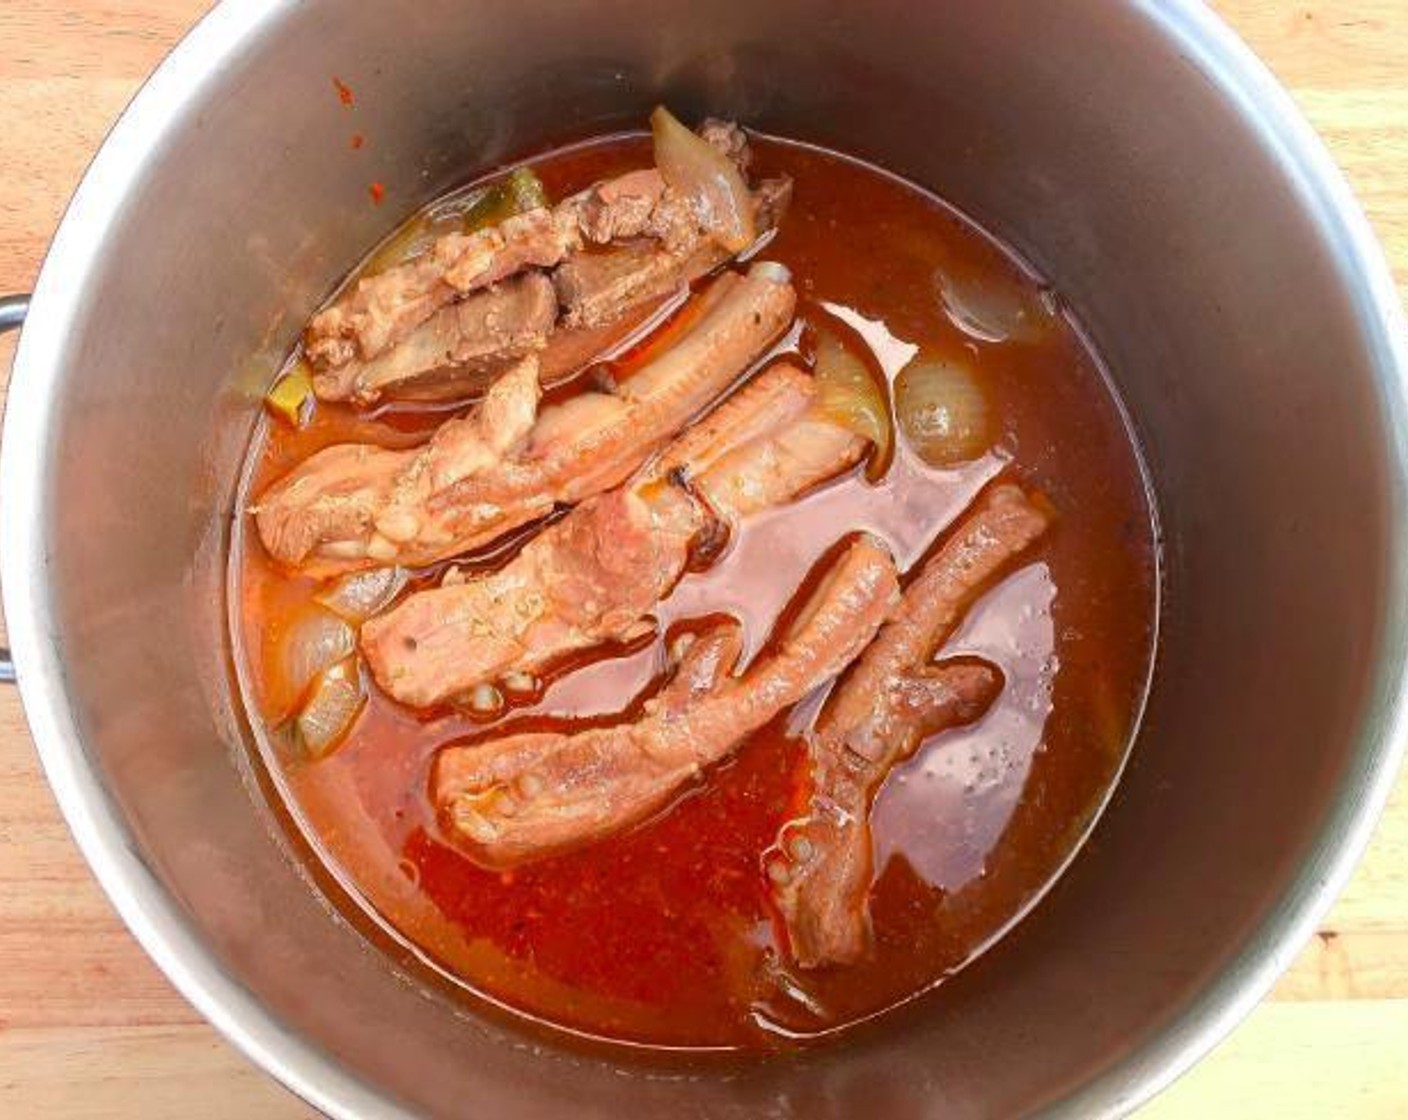 step 2 Simmer pork until very tender, but not falling apart. There should be about 1 quart of stock remaining; if not, adjust with water and additional seasonings. This should take an hour or more depending on the thickness.